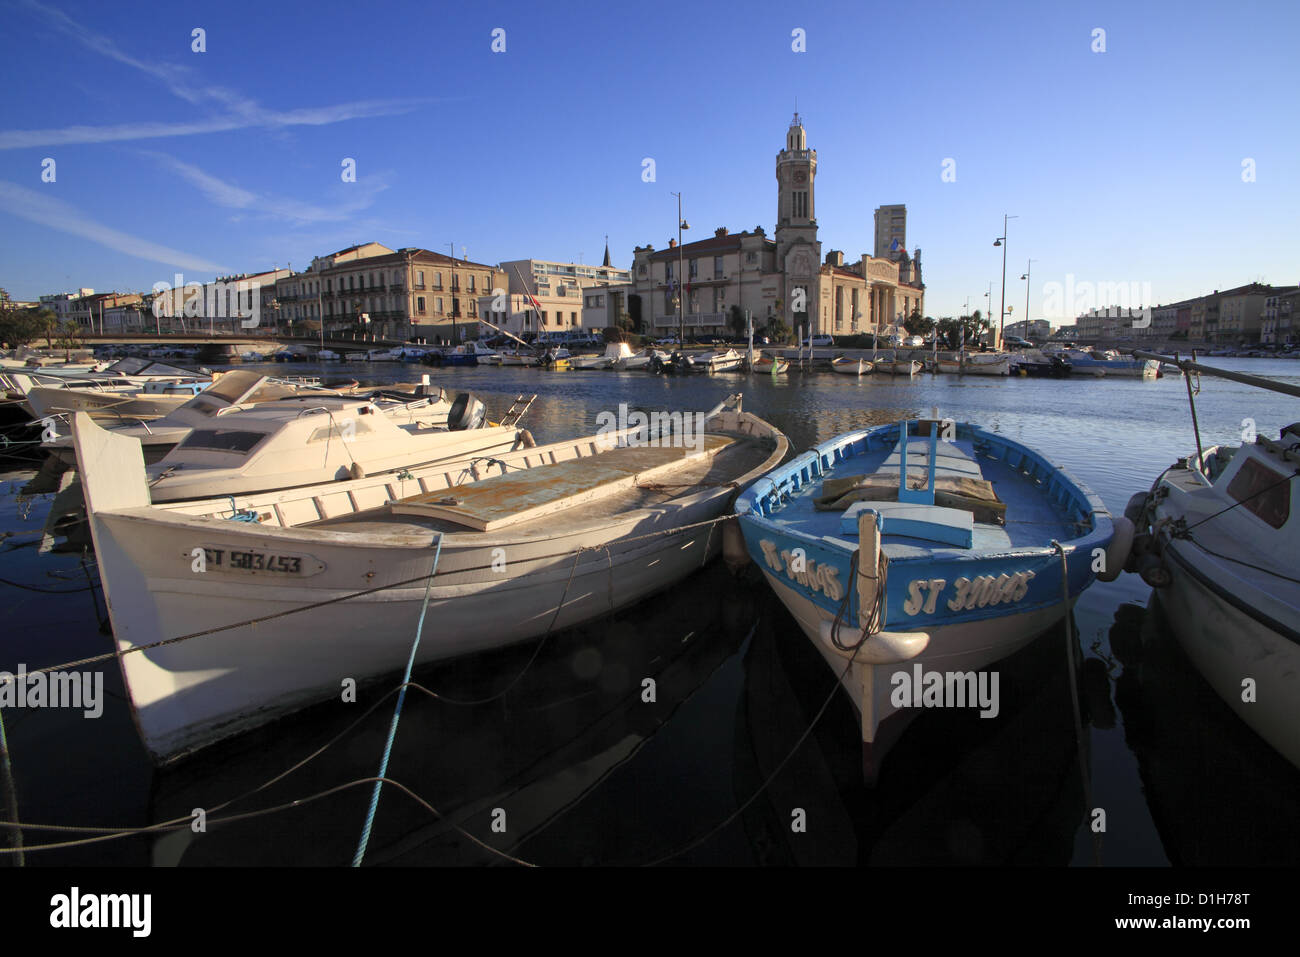 Boats on the canal near the Chamber of trades in Sete, Languedoc Roussillon, France Stock Photo